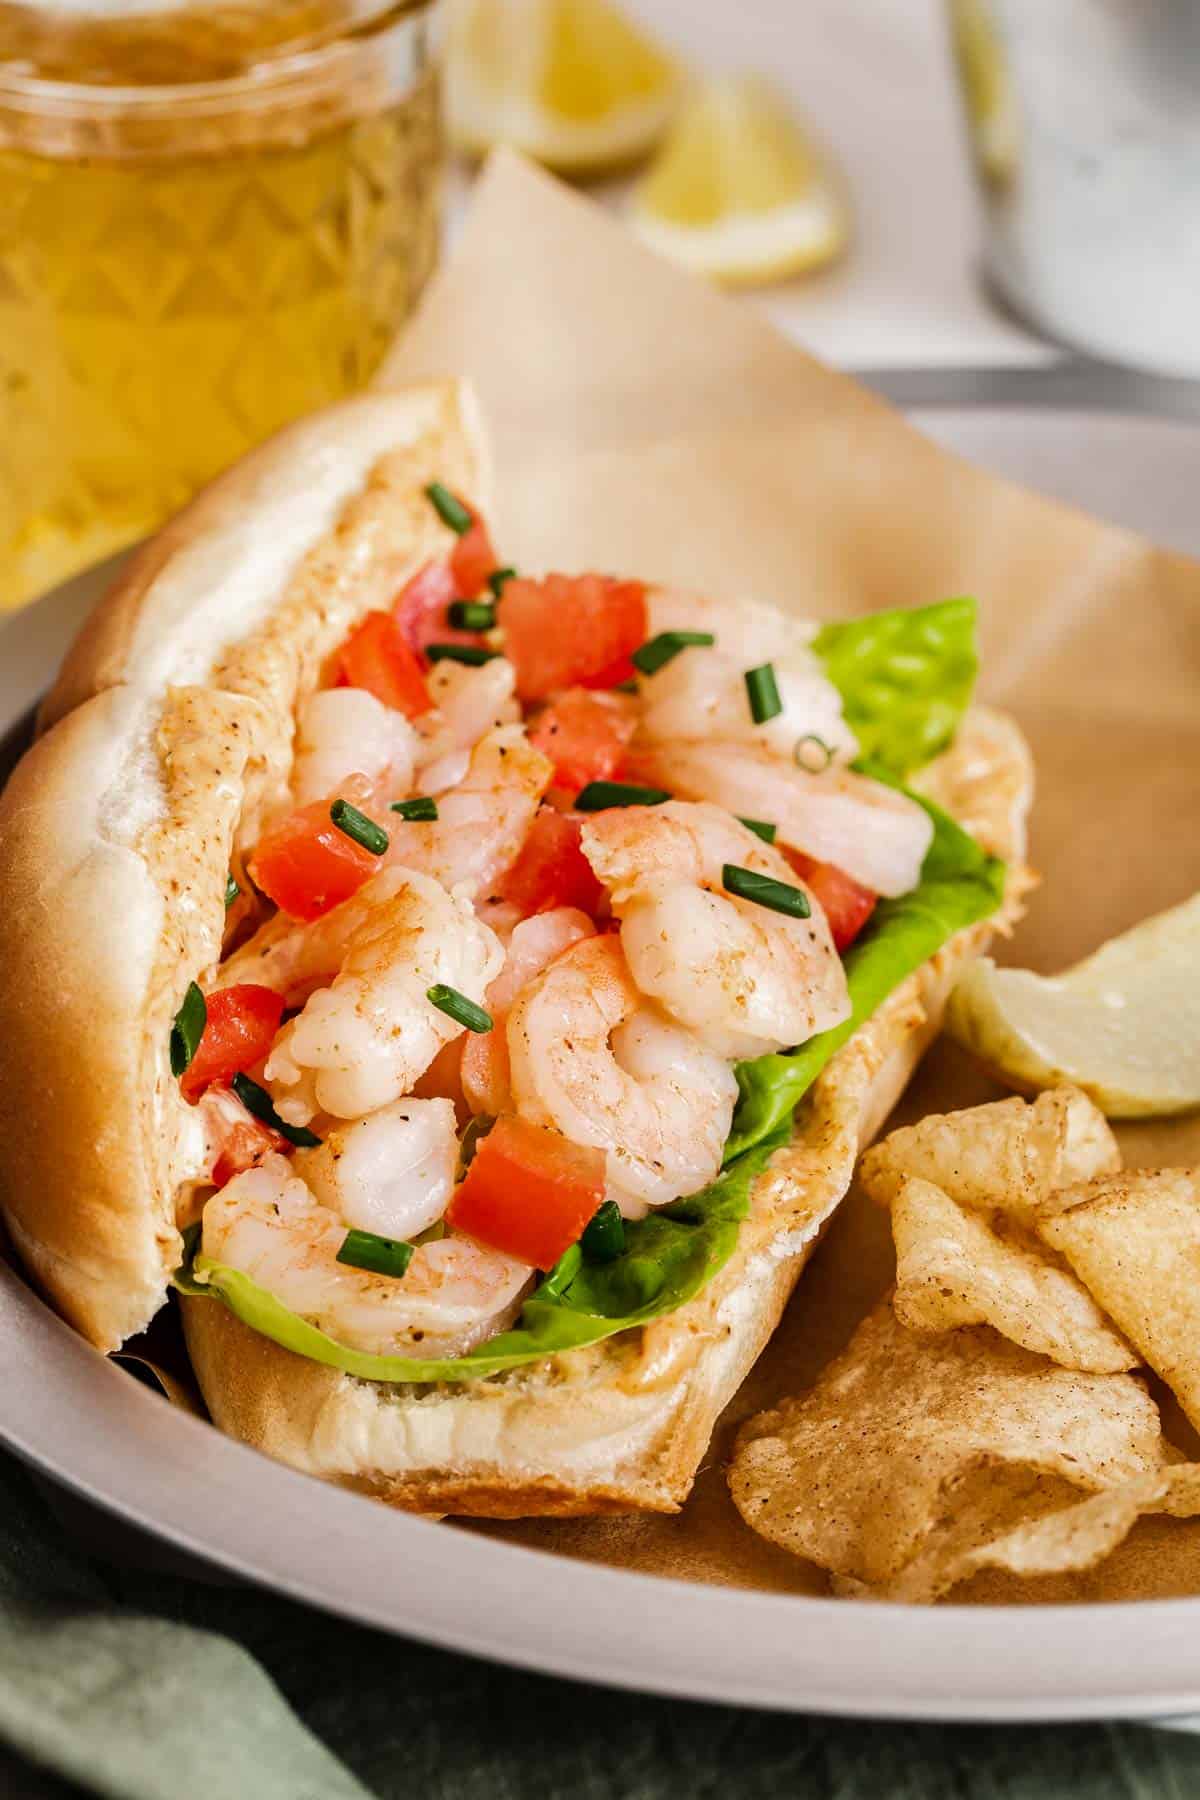 Shrimp po boy sandwich with tomatoes and lettuce on a roll.